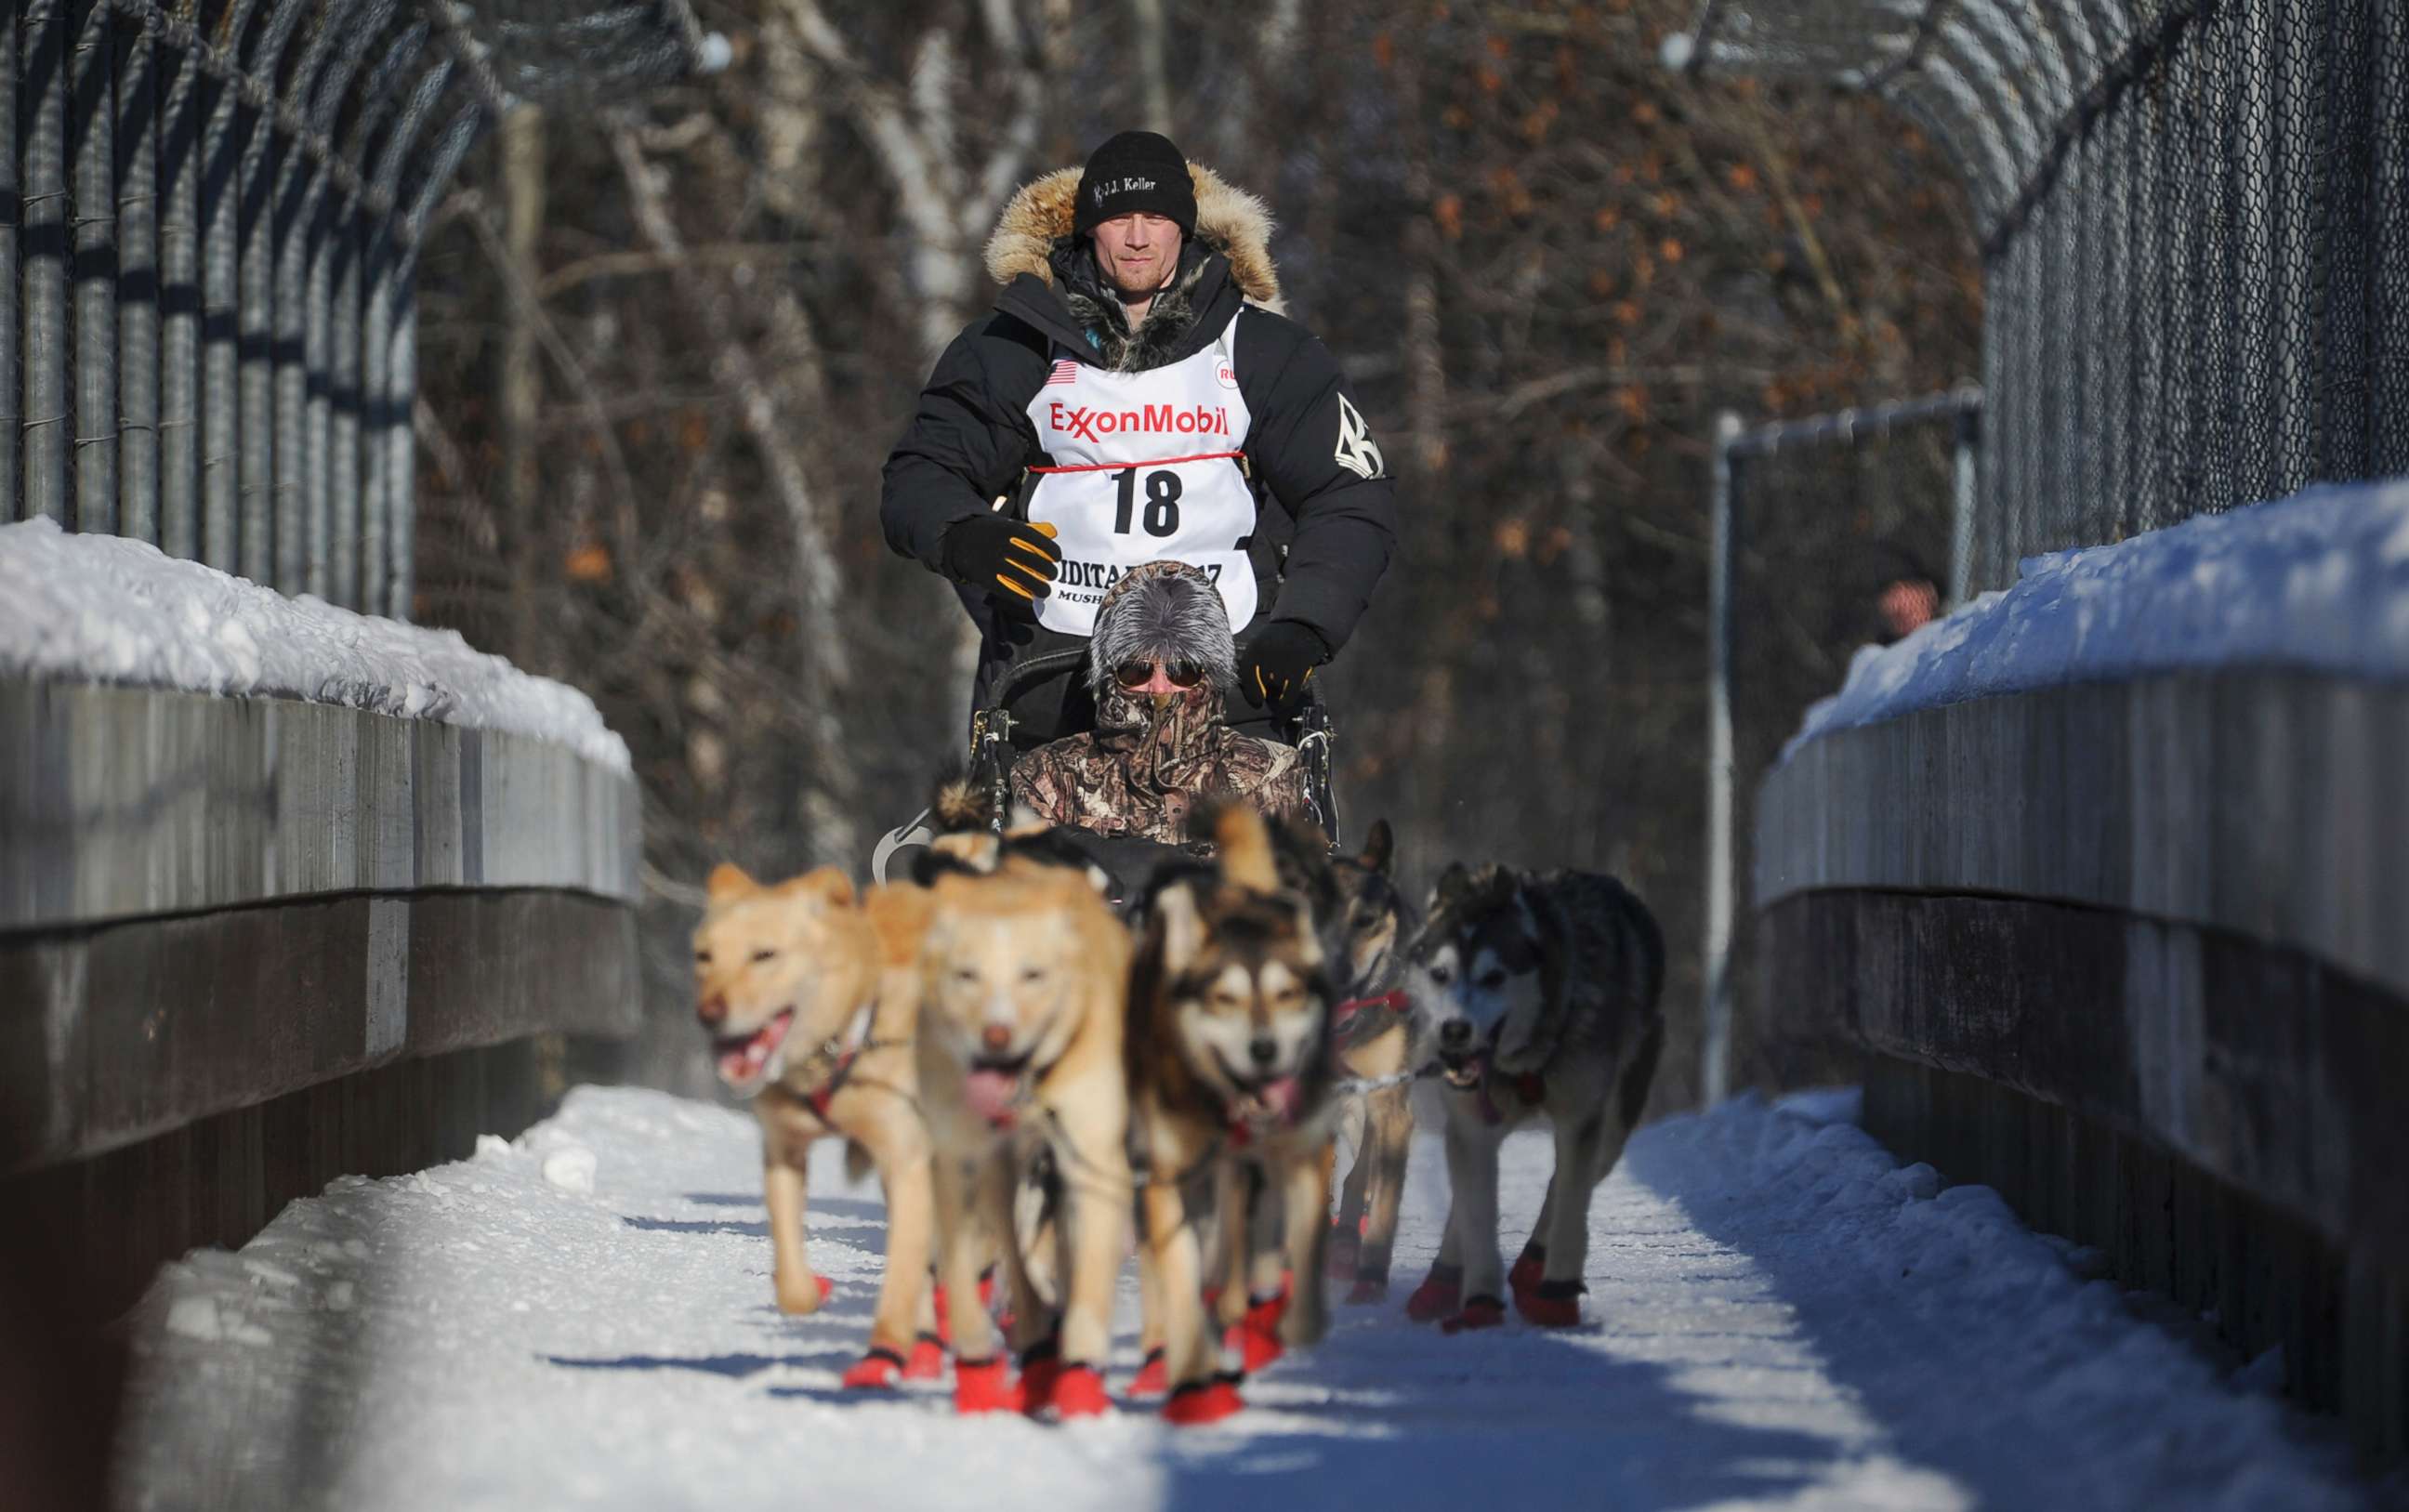 PHOTO: Dallas Seavey mushes during the ceremonial start of the Iditarod Trail Sled Dog Race in Anchorage, Alaska in this March 4, 2017 file photo.